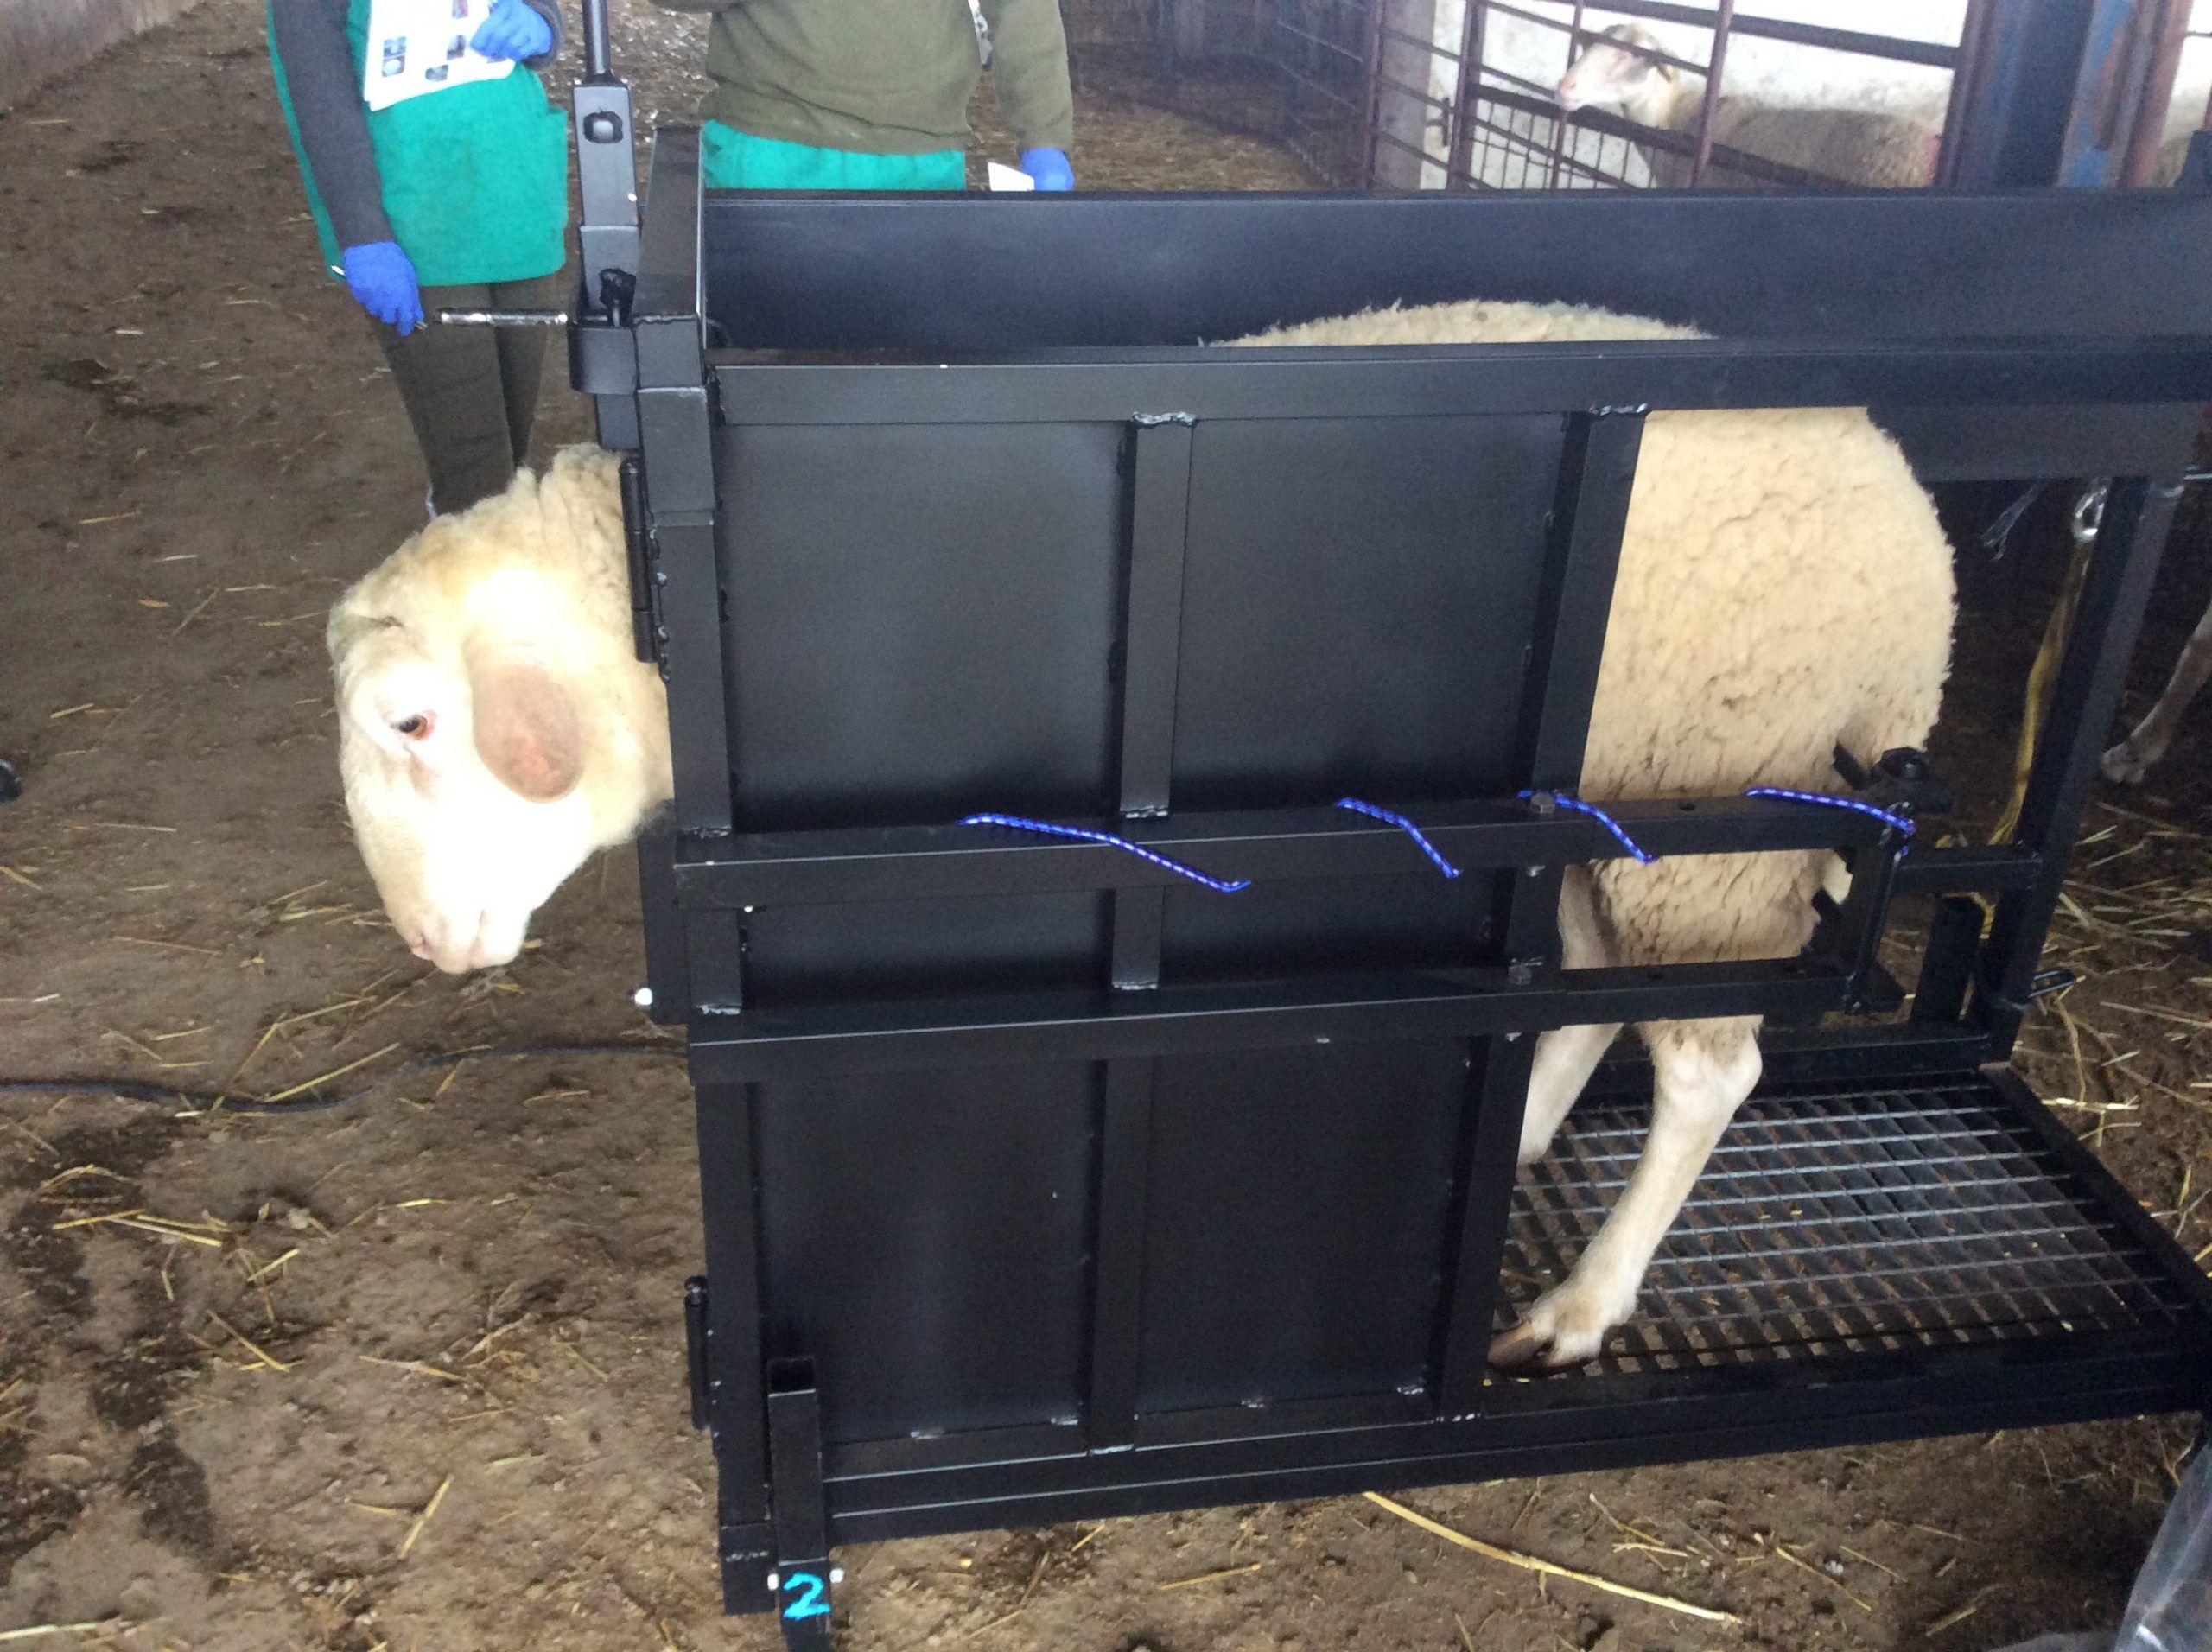 A drawer to enter the ram and collect a semen sample